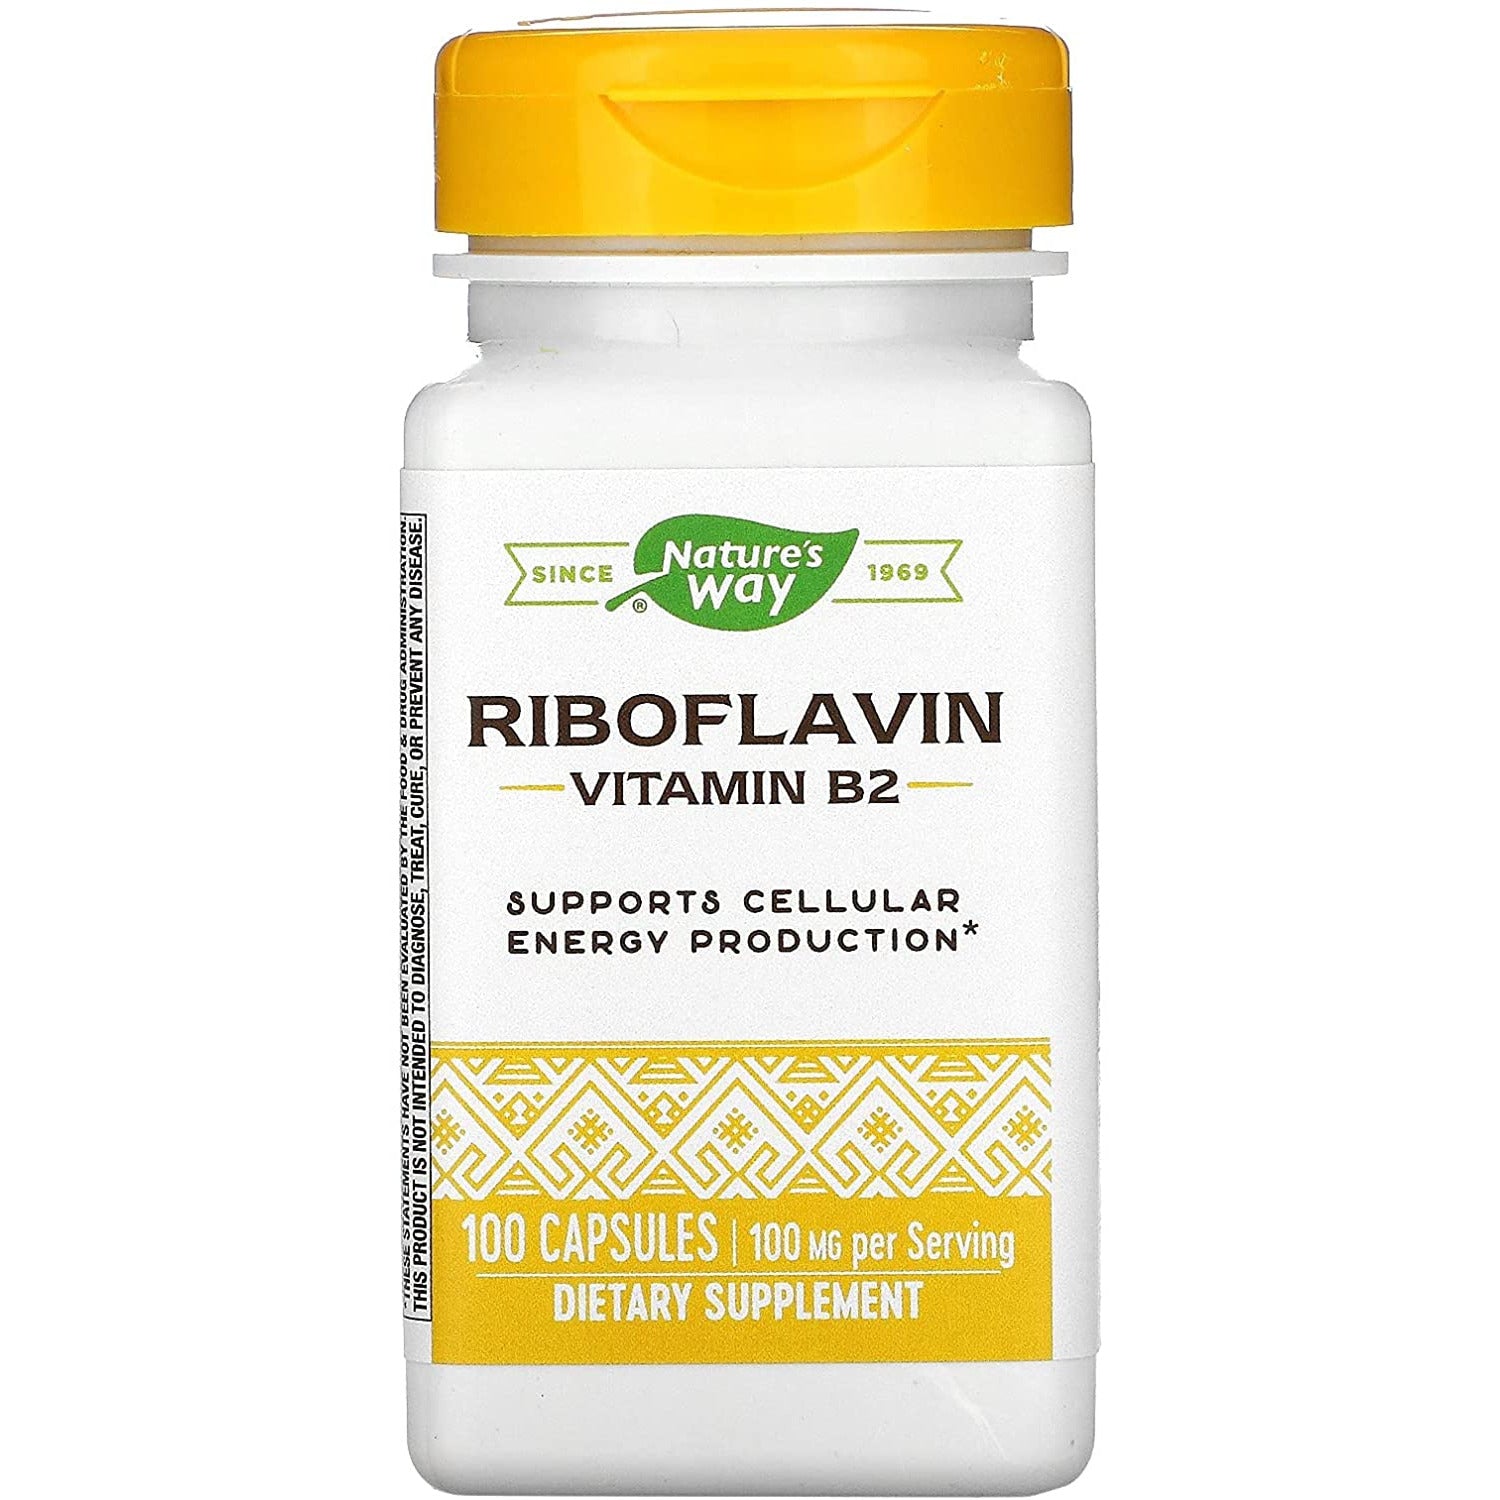 Nature's Way Riboflavin Vitamin B2, Supports Cellular Energy Production*, 100mg per Serving